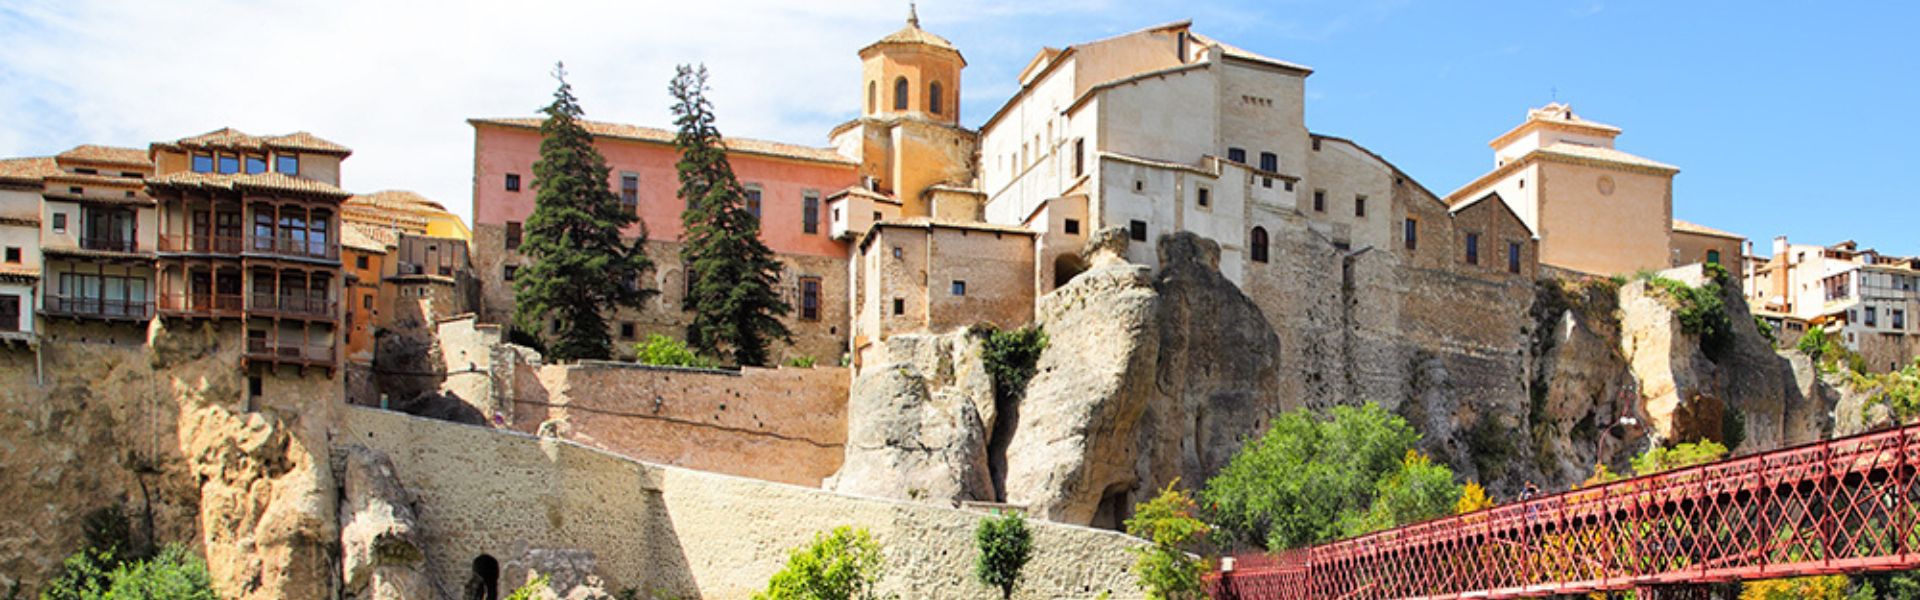 Cuenca Discover Spain Campaign scrolling banner 10Jan23